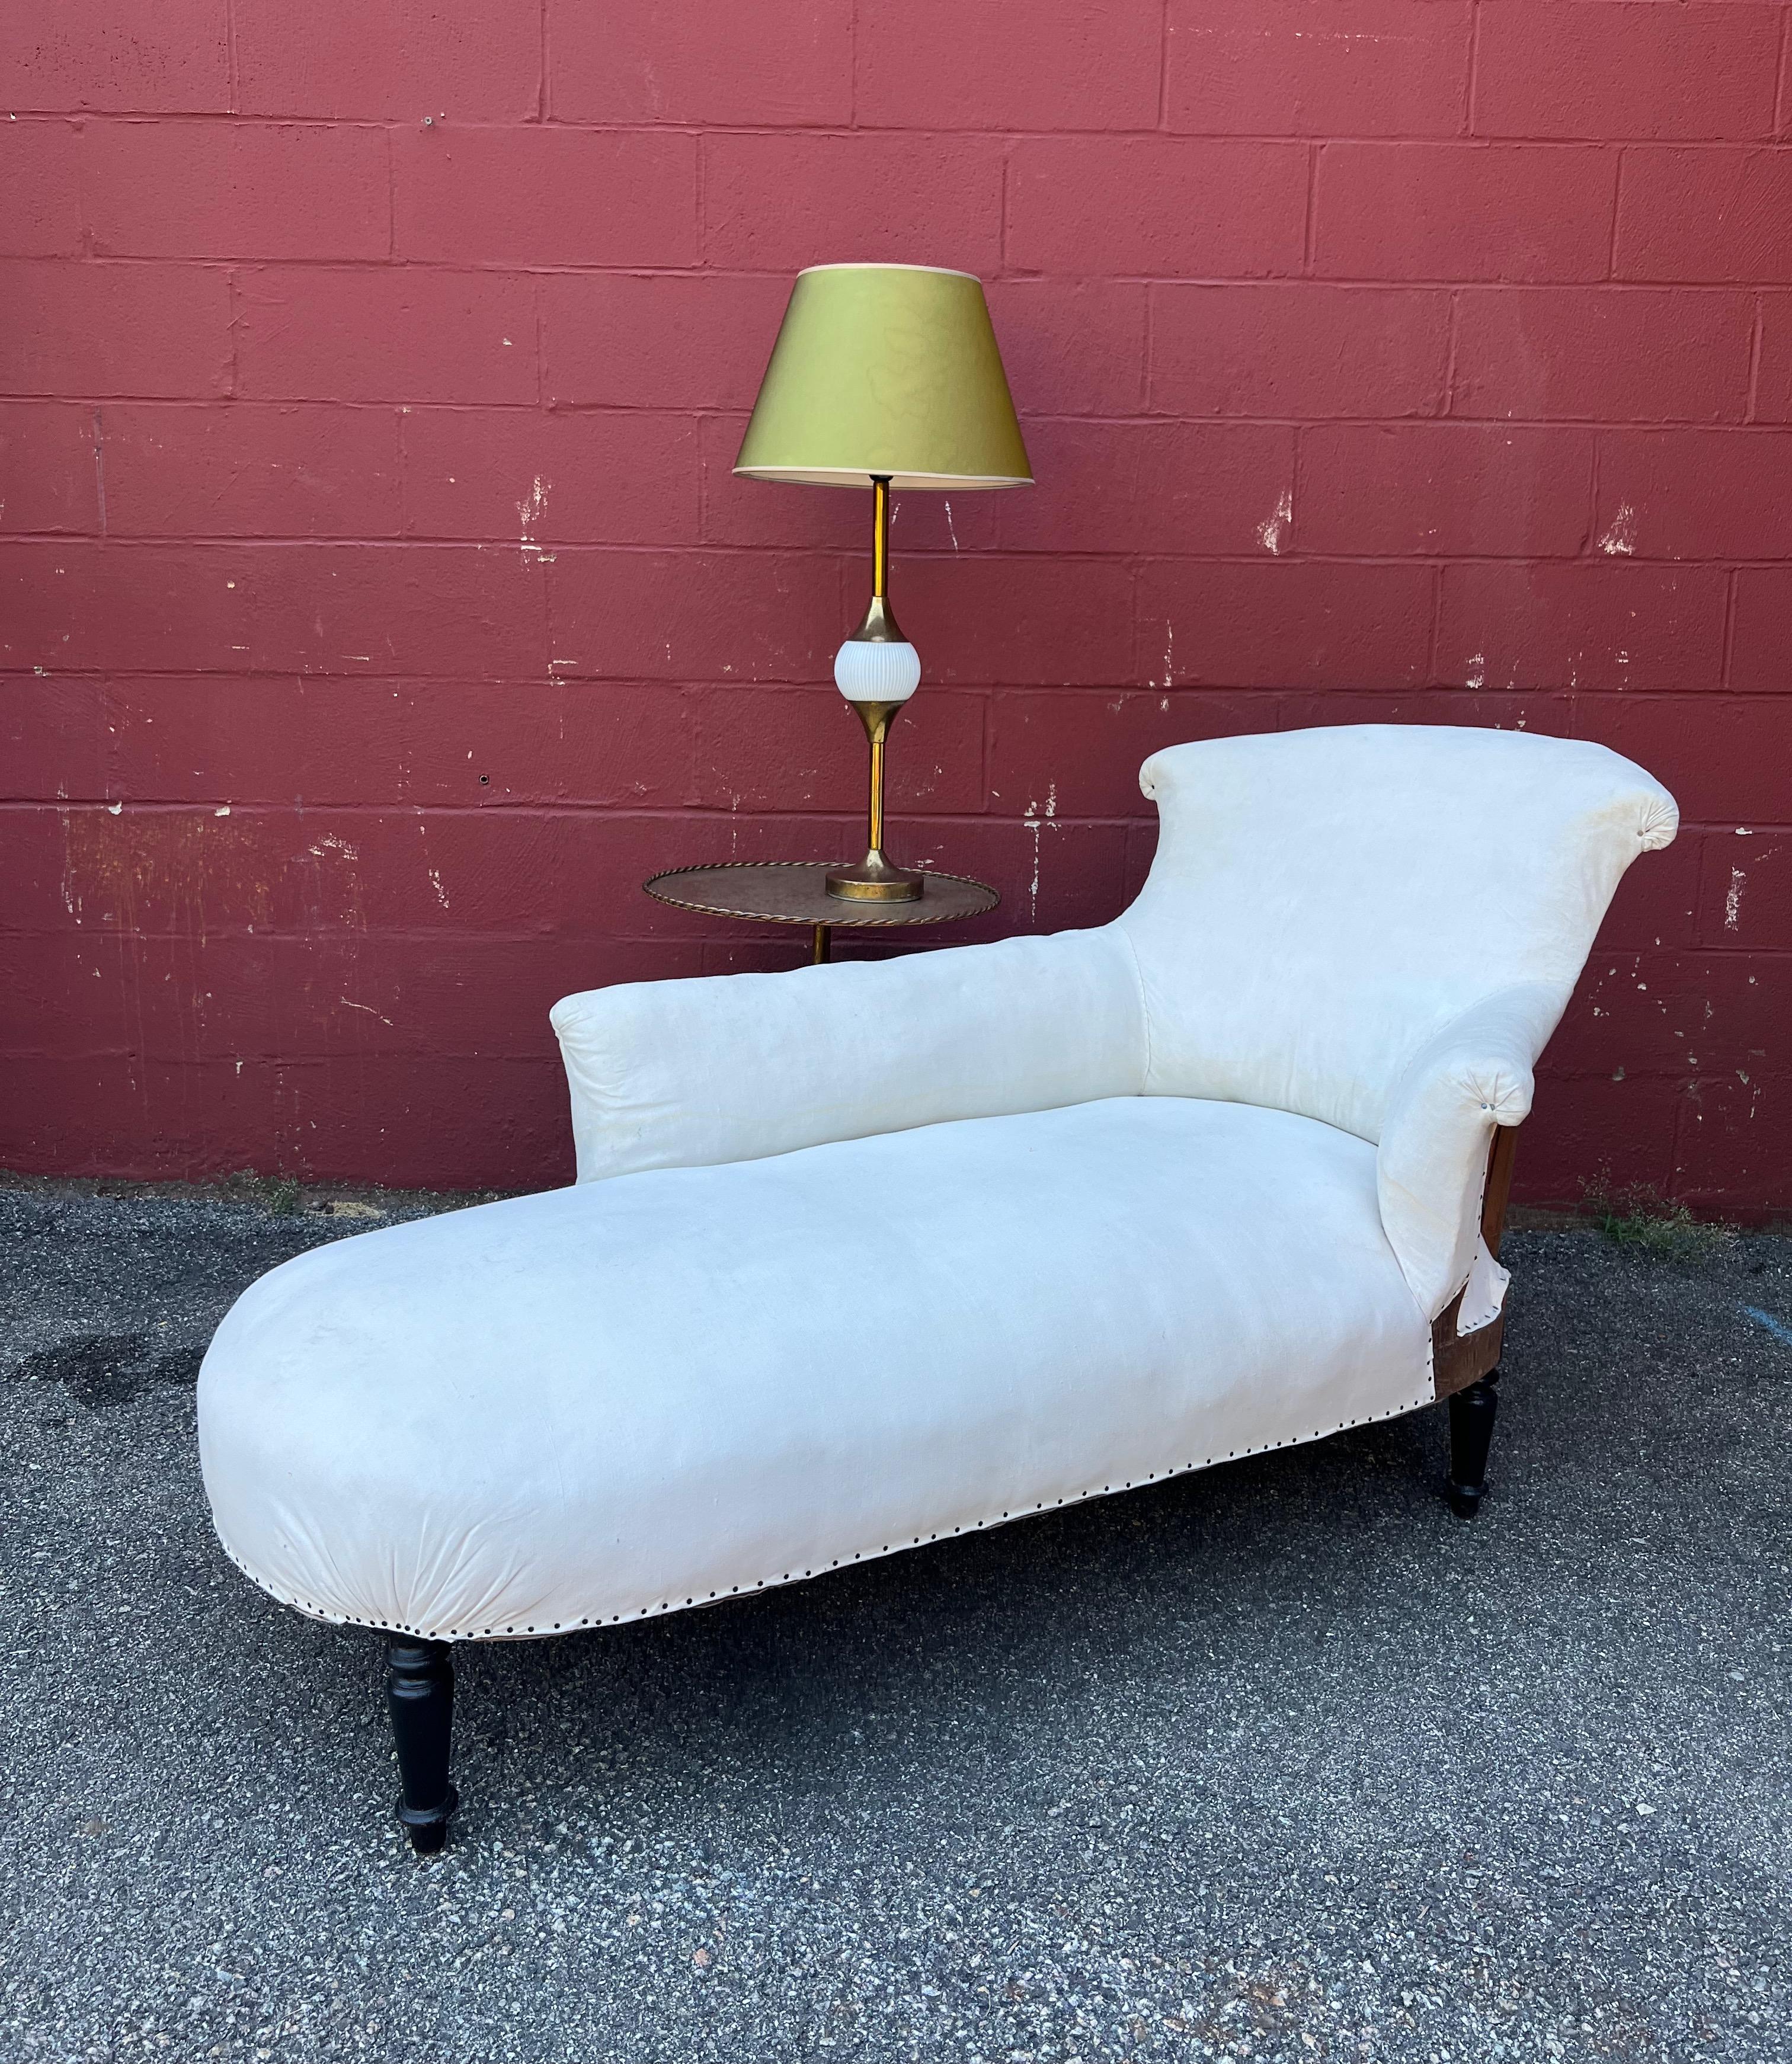 An exquisite French 19th century Napoleon III asymmetrical chaise lounge. This timeless classic is perfect for adding a touch of elegance and effortless style to any space. The classic French design features a charming “chapeau de Gendarme” detail